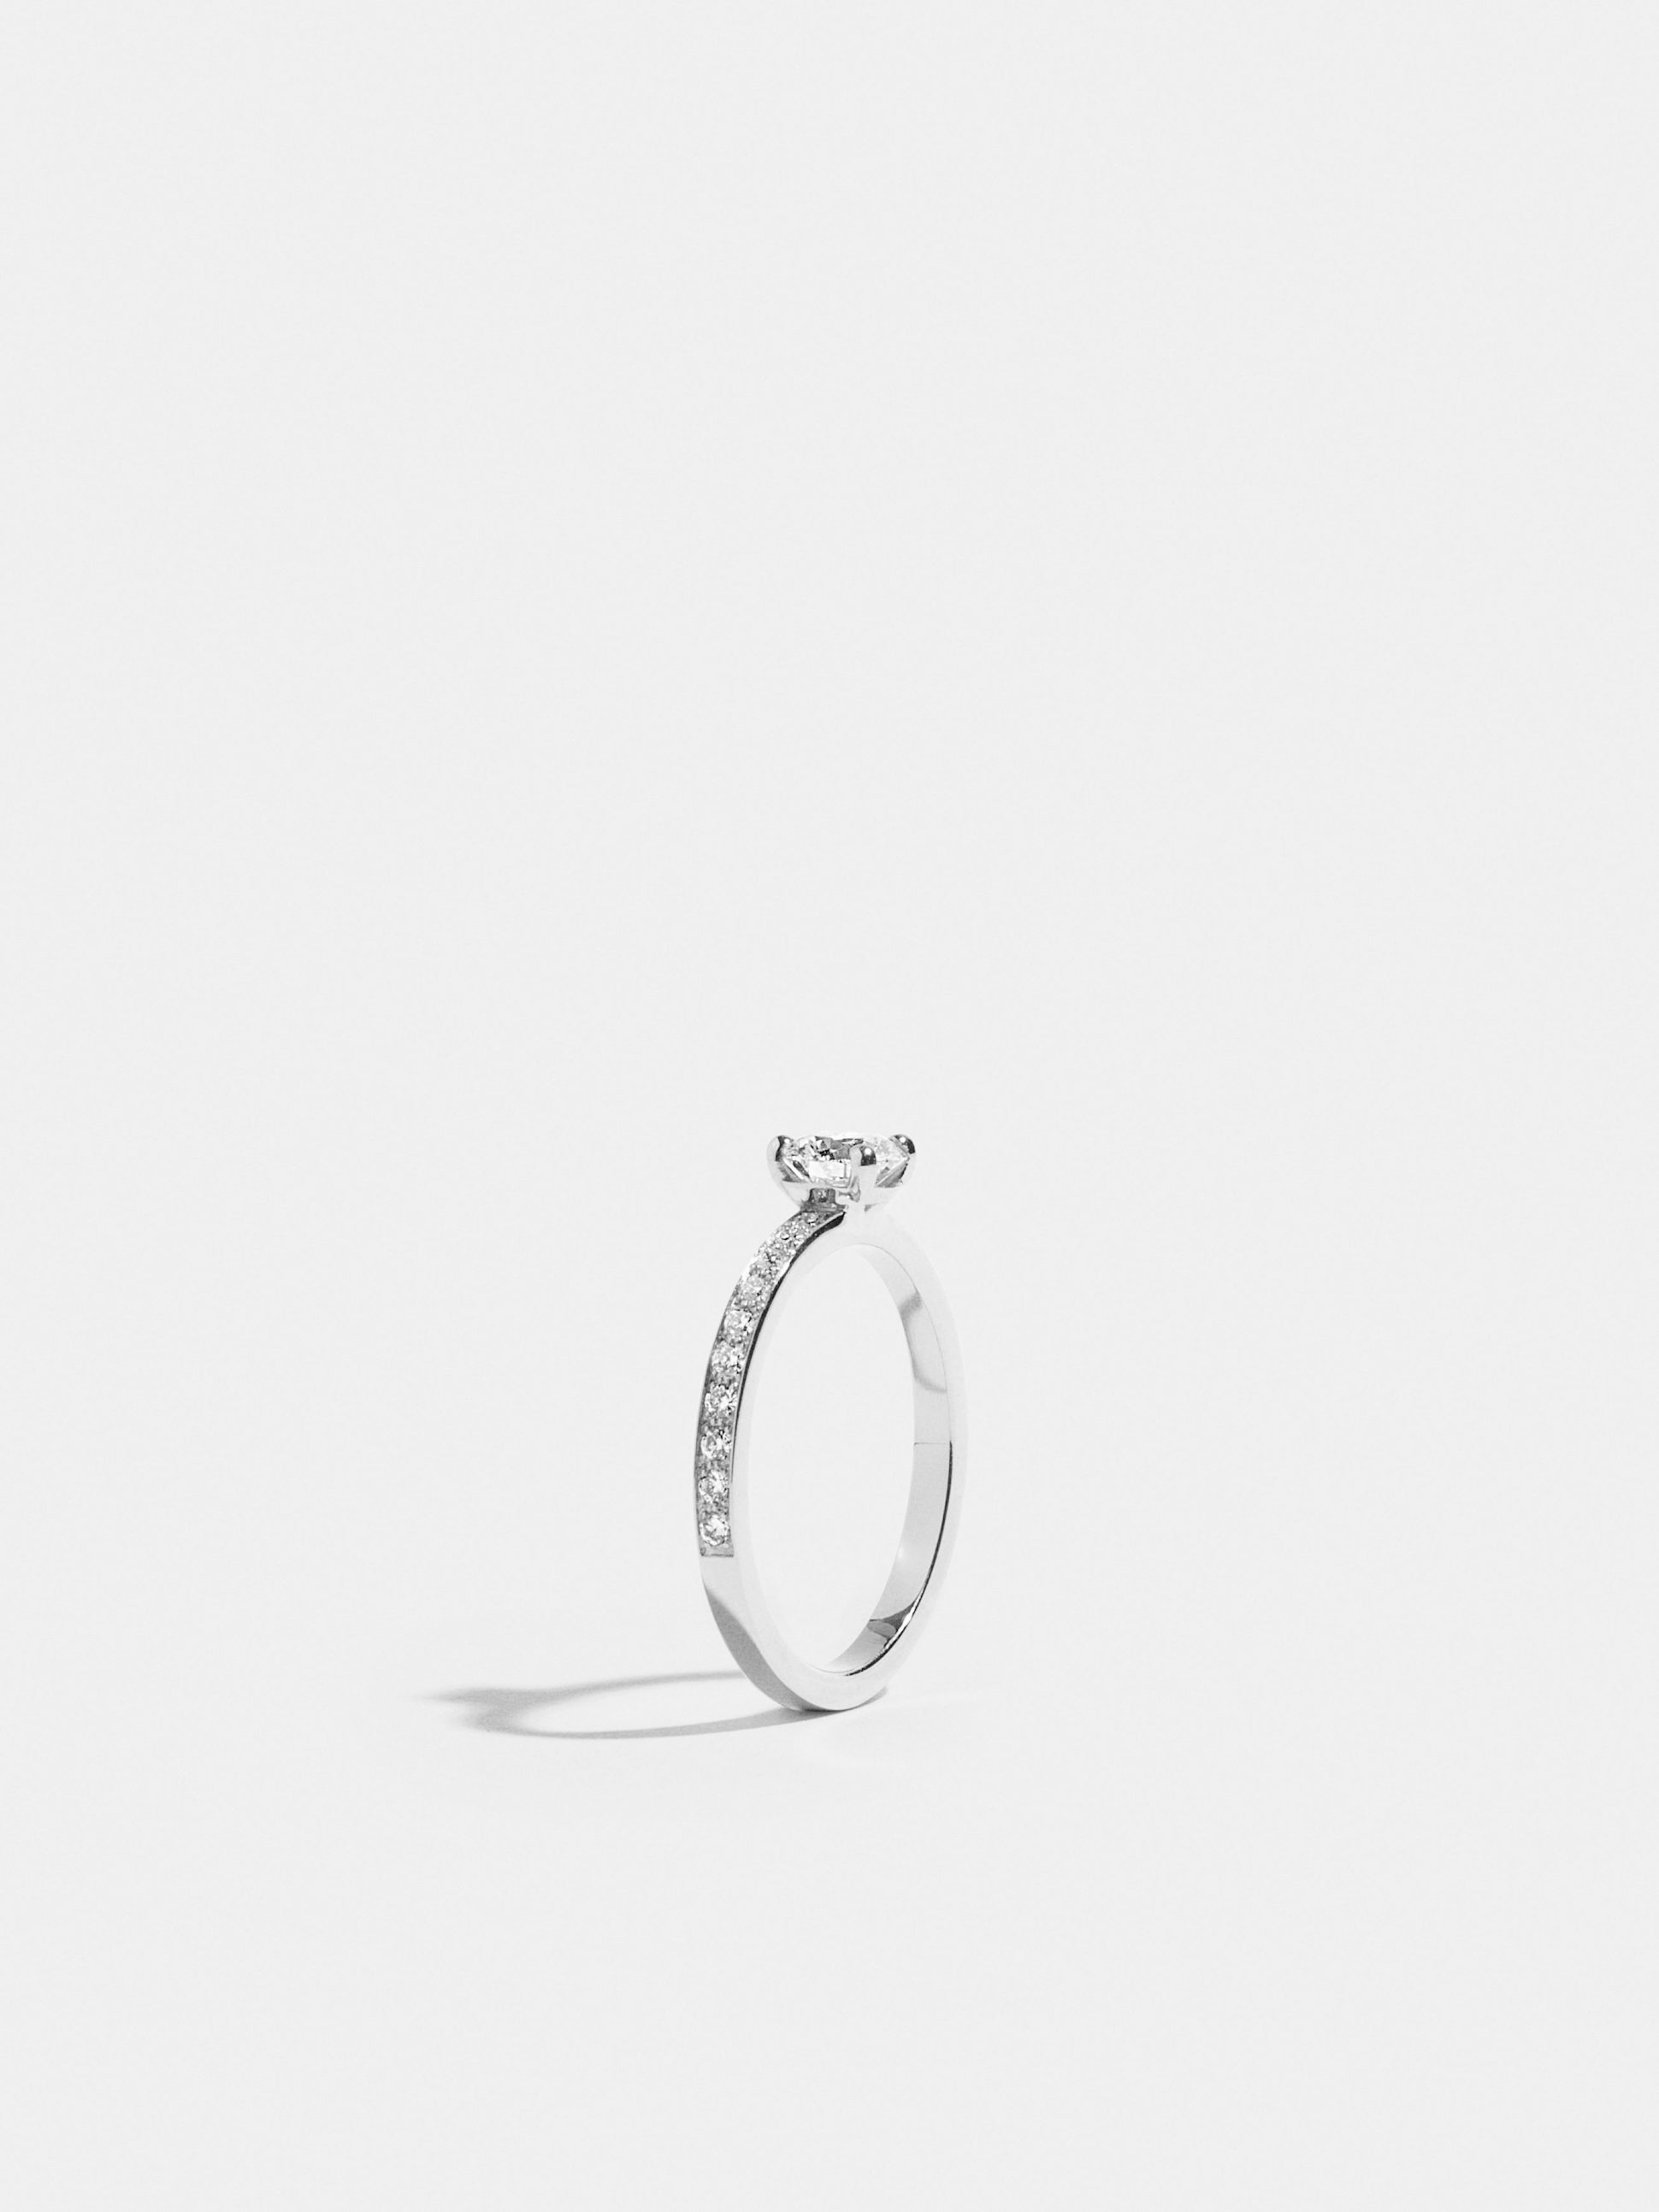 Solitaire Anagramme flat ribbon in white gold 18k Fairmined ethical, paved and set with a 0.50 carat brilliant cut labgrown diamond